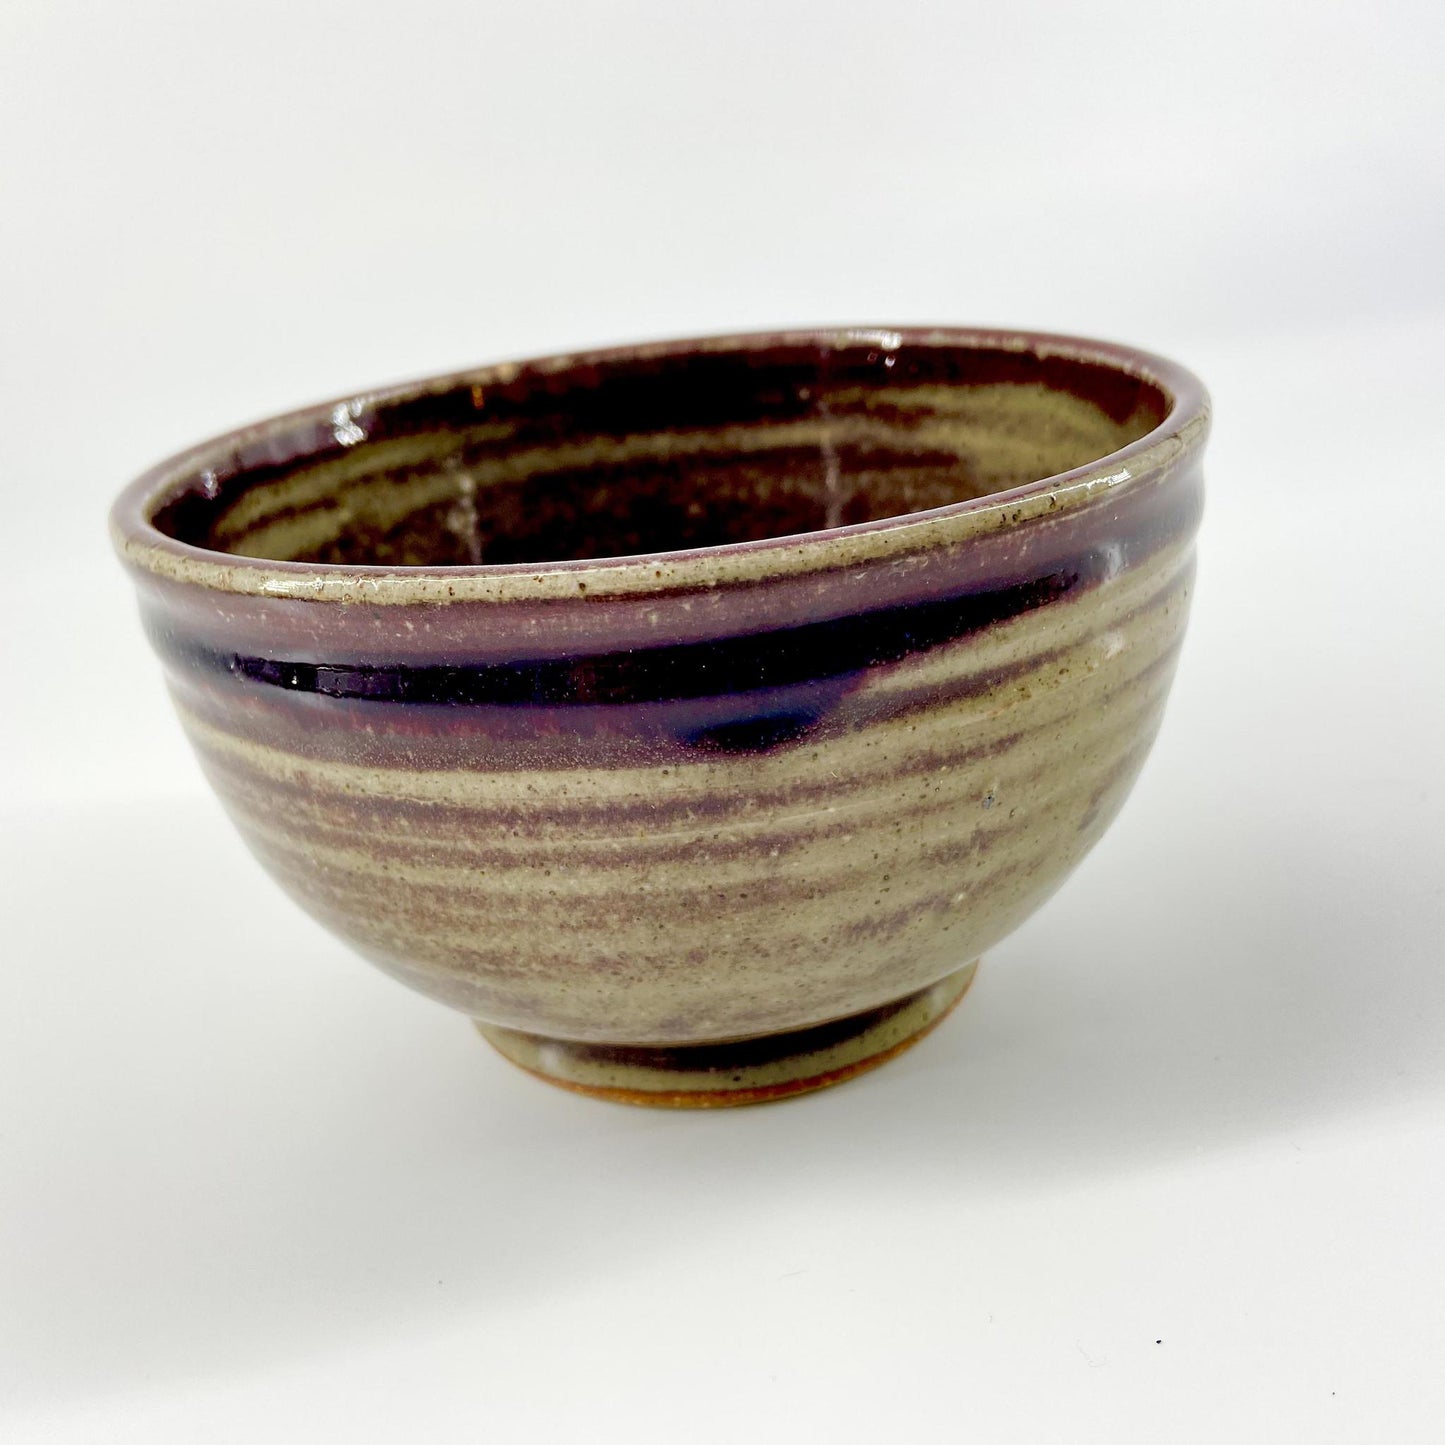 Bowl - Footed "Every Day" Bowl - Handmade Pottery